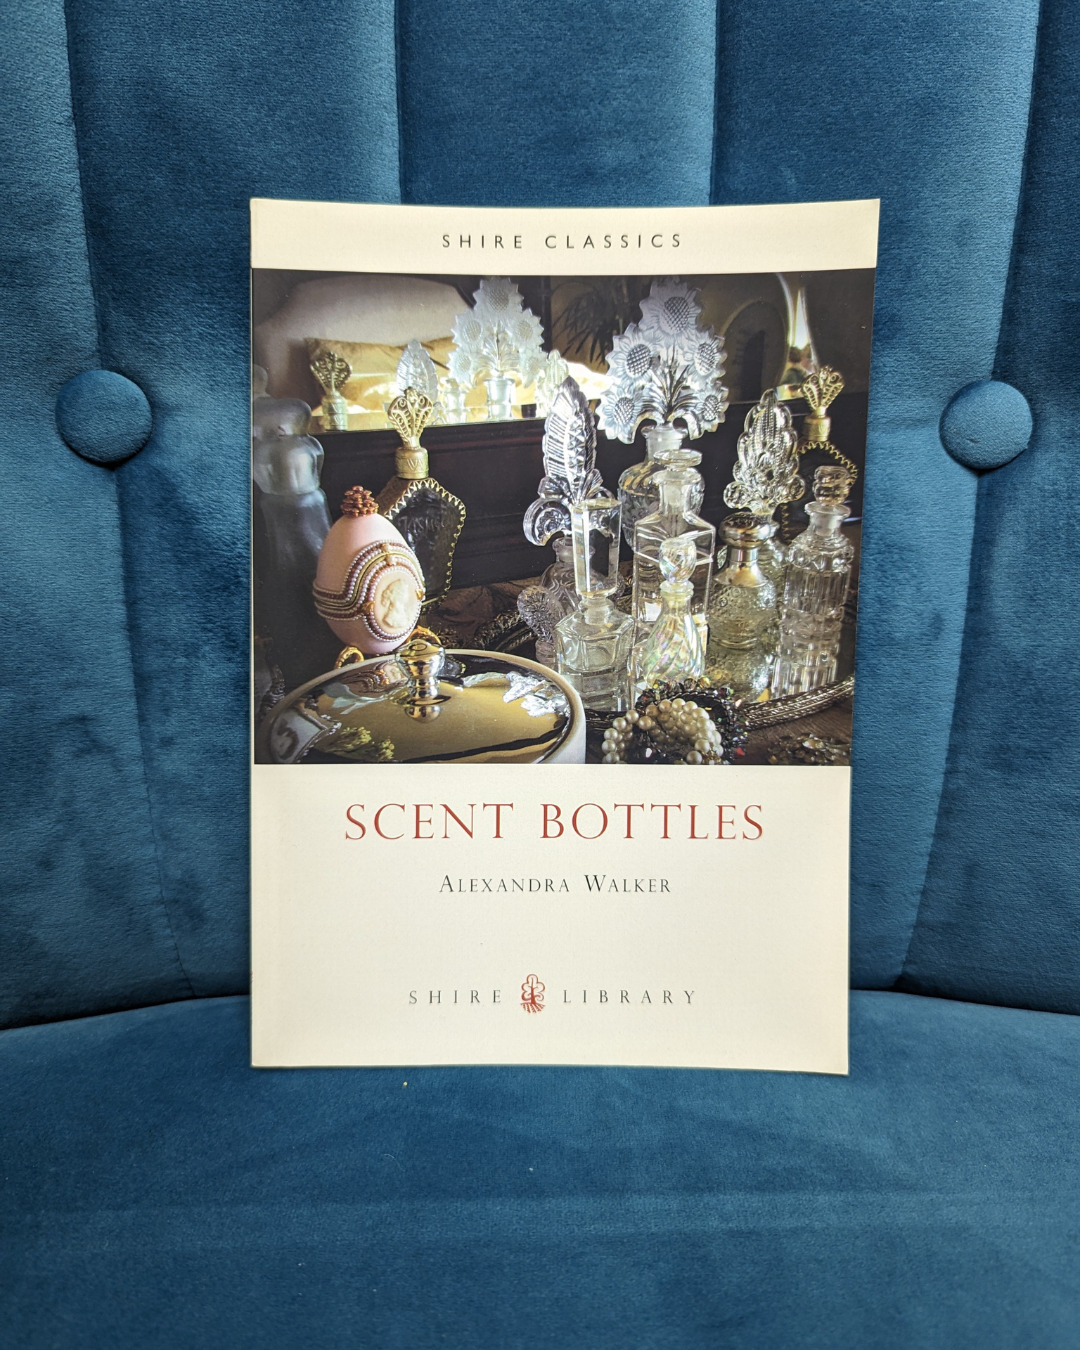 A book about scent bottles